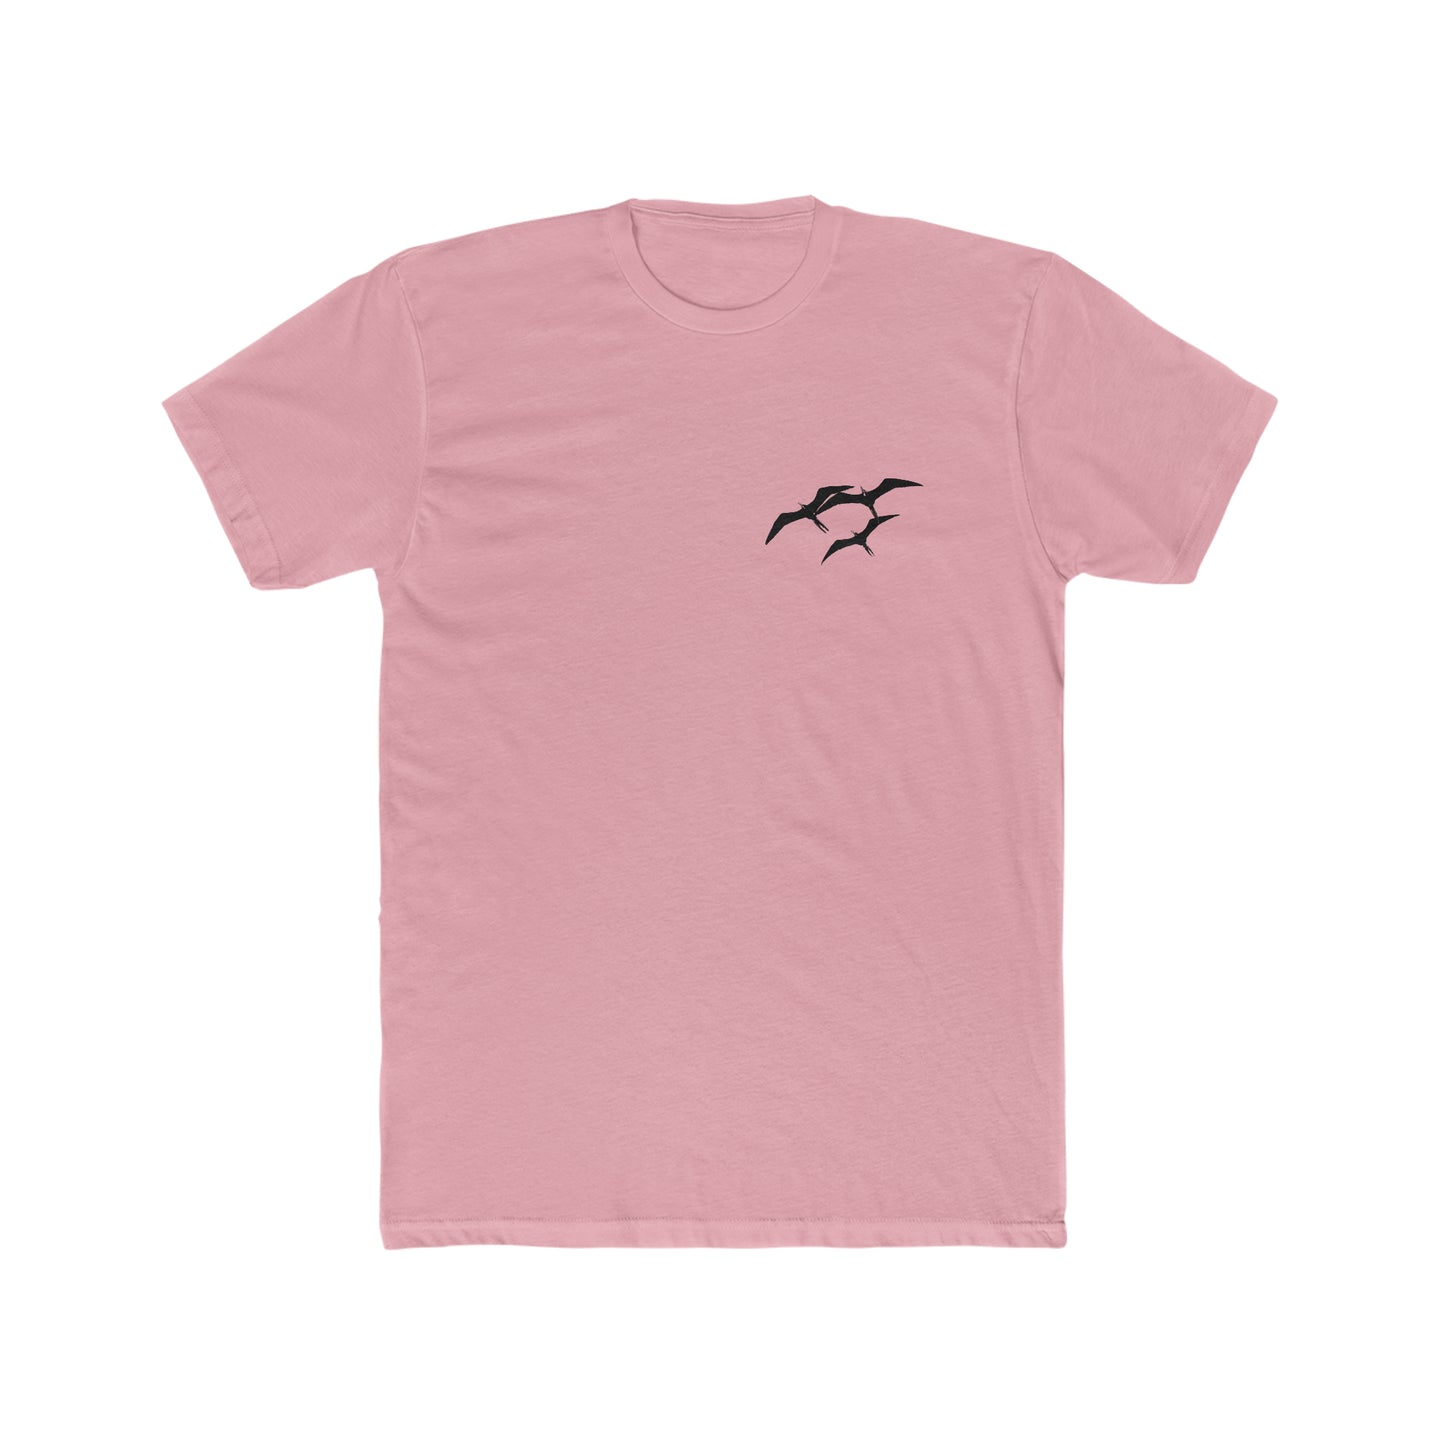 Morris Lures Tails Up T-Shirt